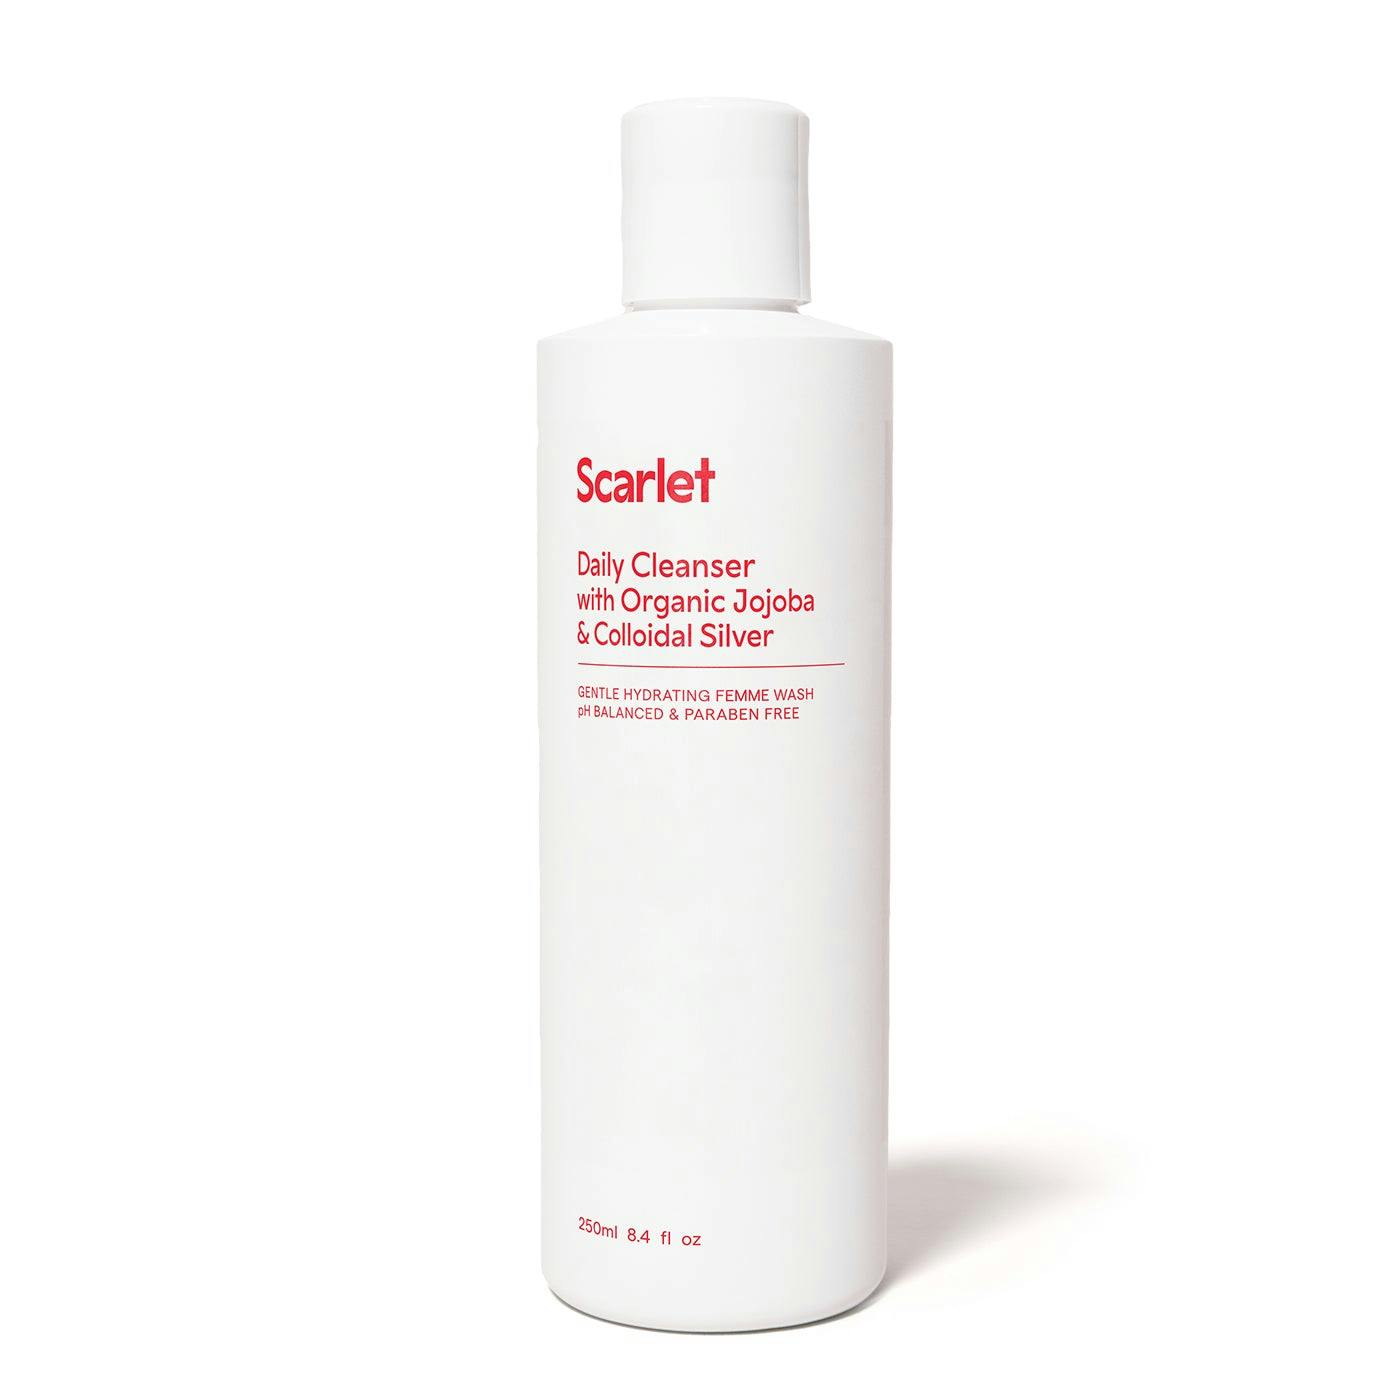 Scarlet Daily Cleanser (Unscented) with Organic Jojoba Oil - 250ml